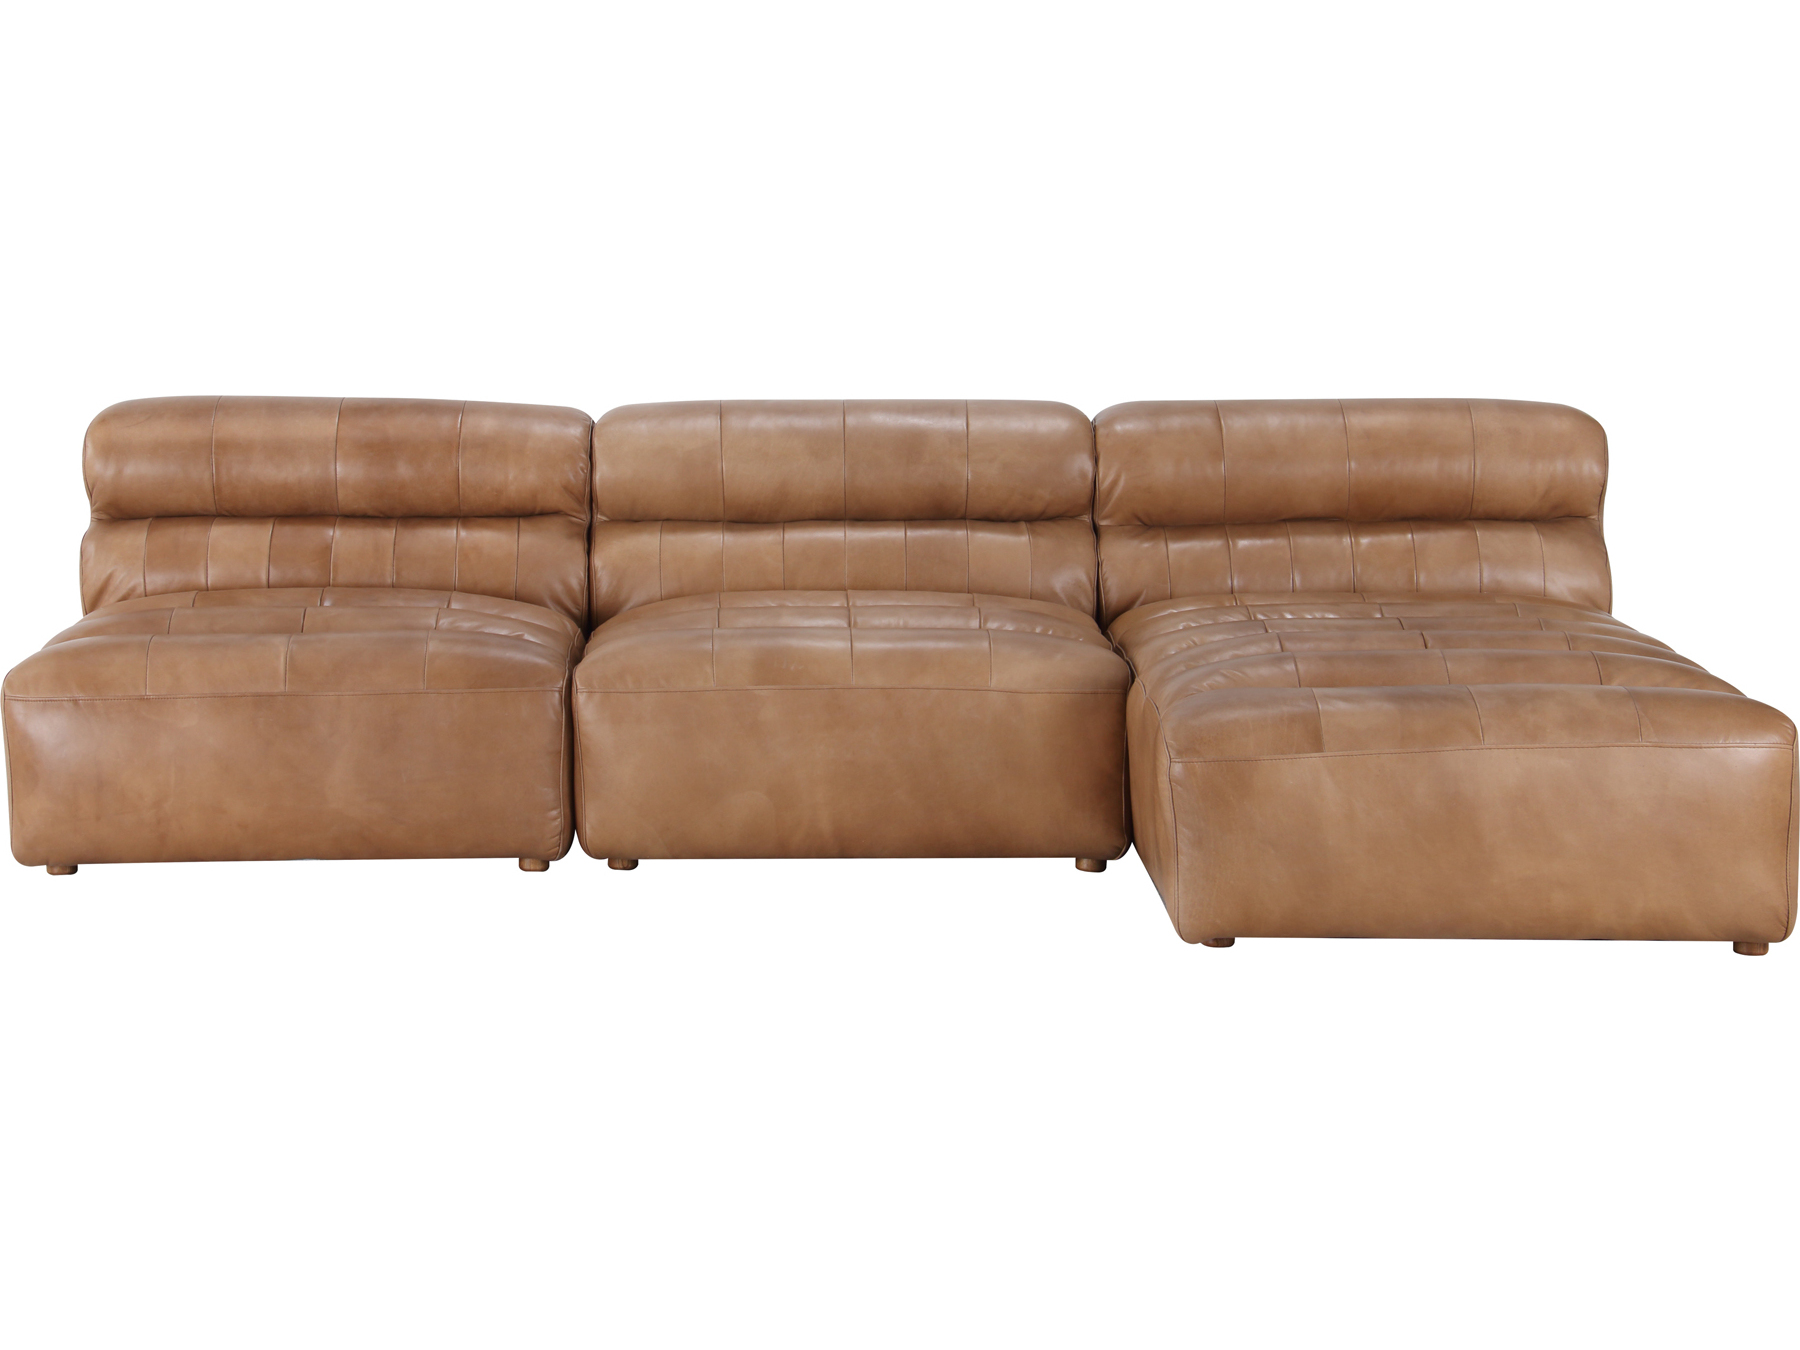 Old Kaprys Sectional Sofa Meqn101840, Moe Top Grain Distressed Brown Leather Power Reclining Sectional Sofa